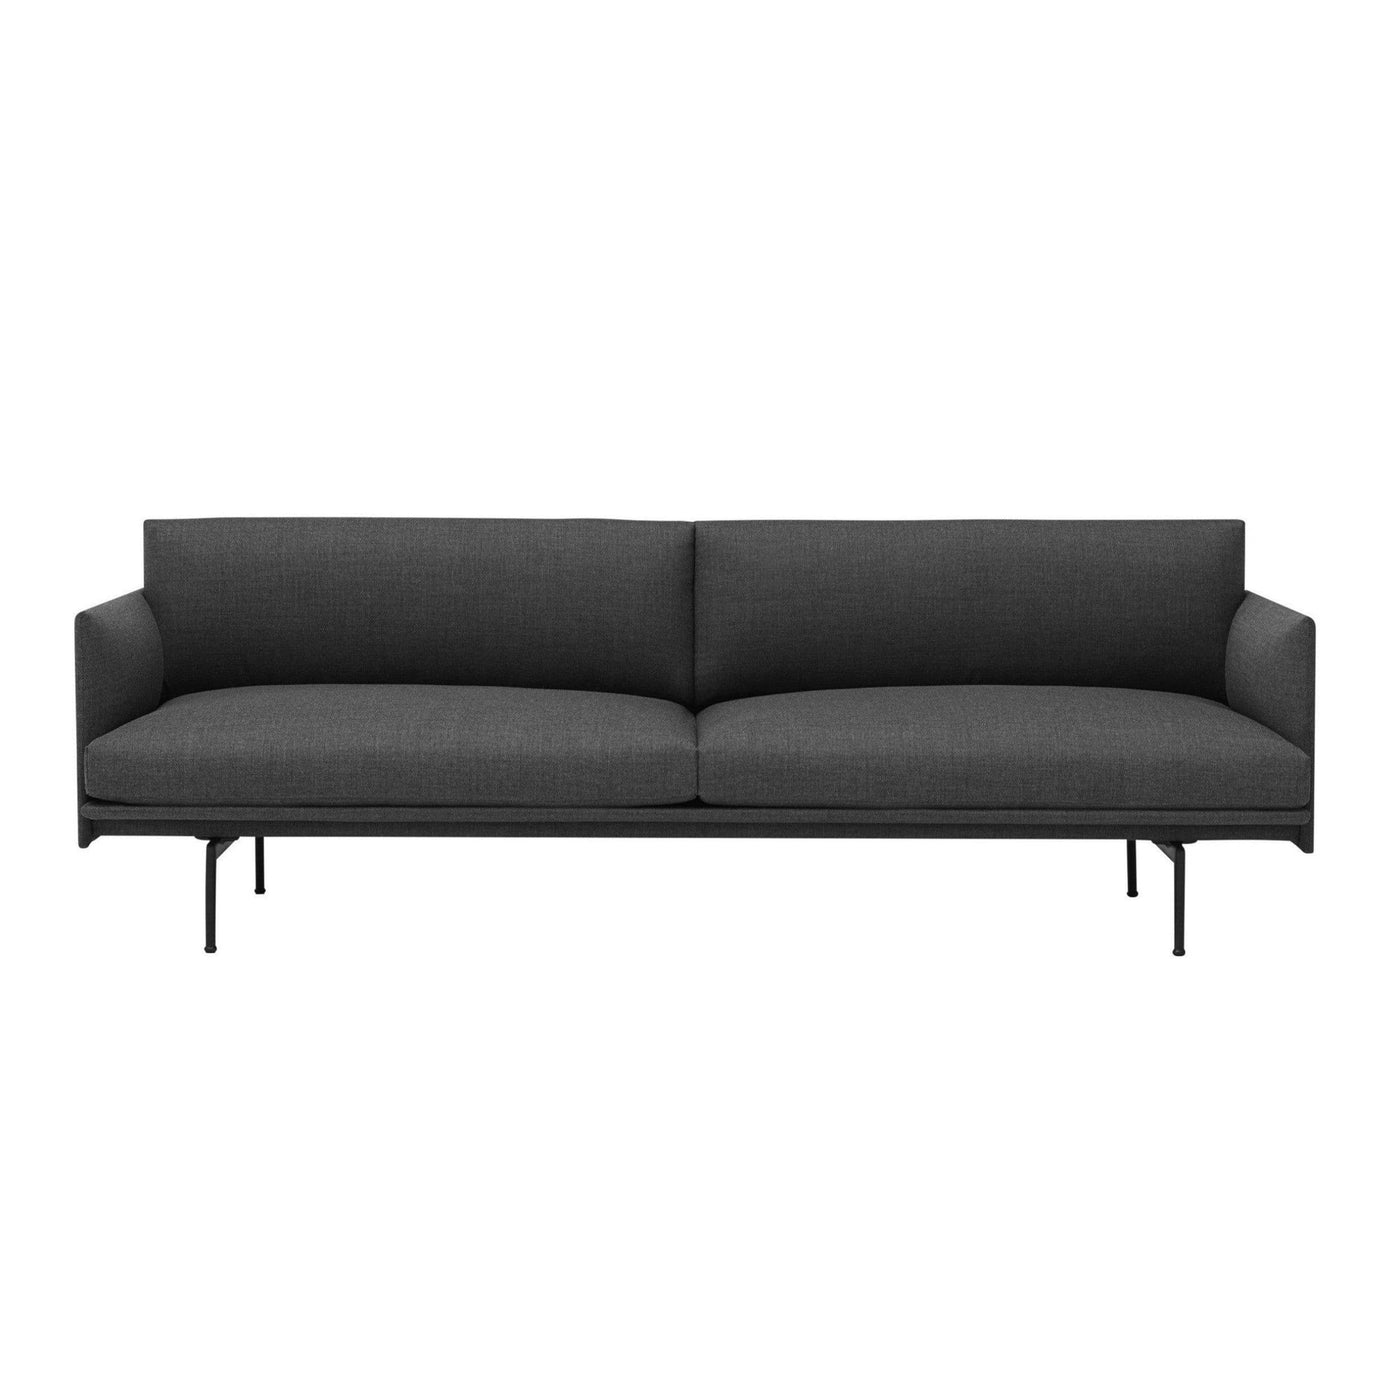 Muuto Outline 3 seater sofa with black legs. Available from someday designs. #colour_remix-163